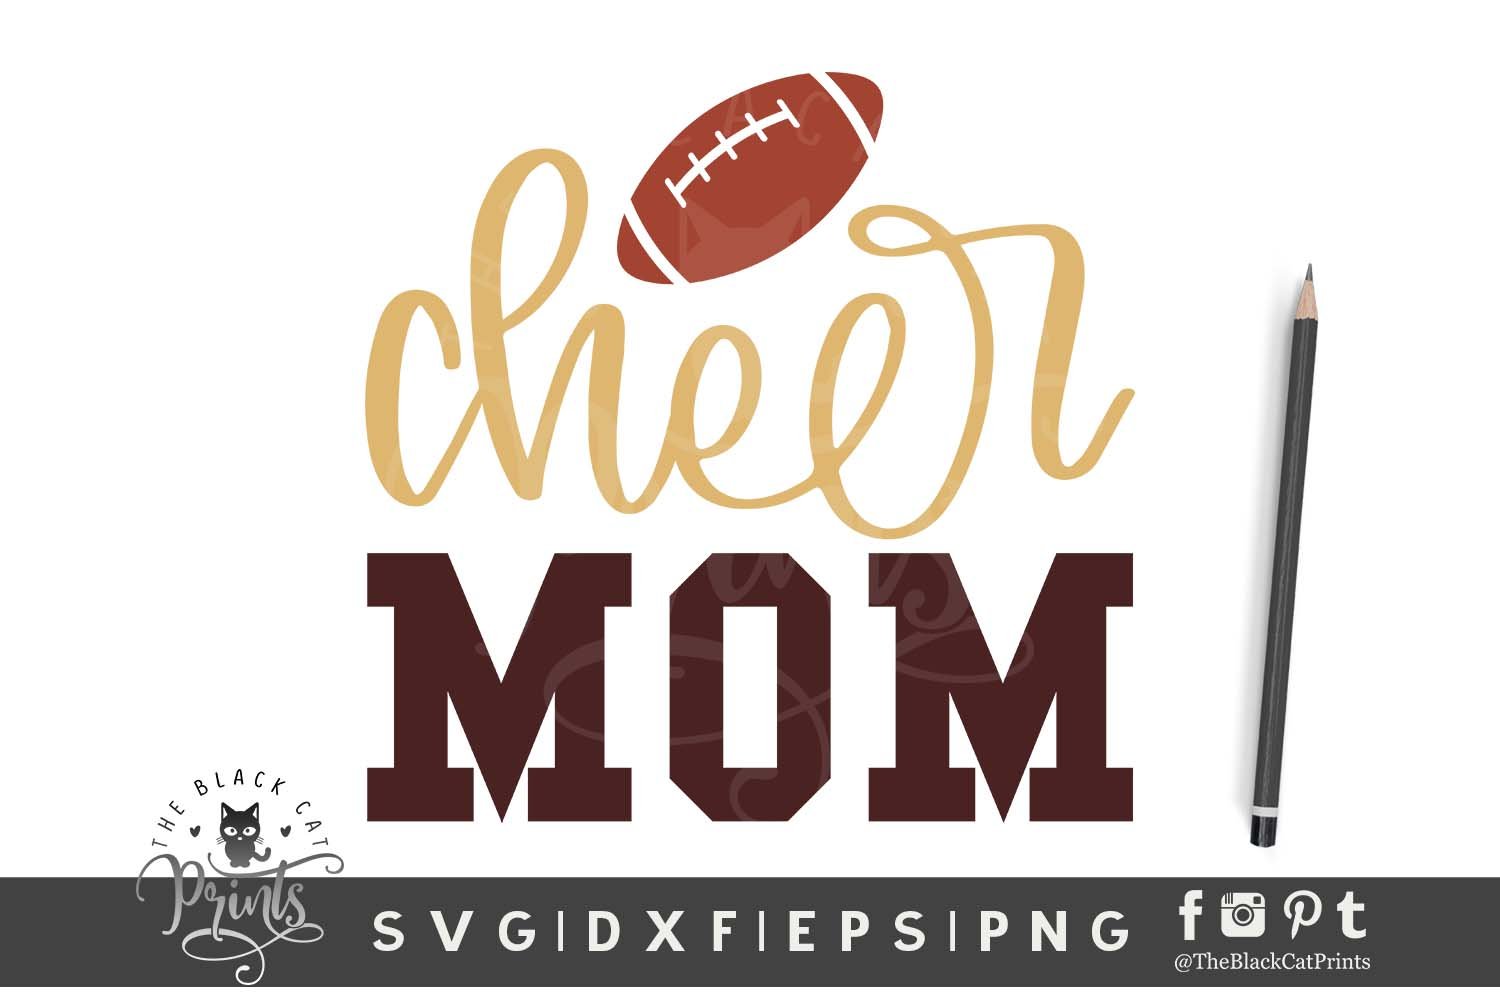 Cheer Mom SVG DXF EPS PNG cover image.